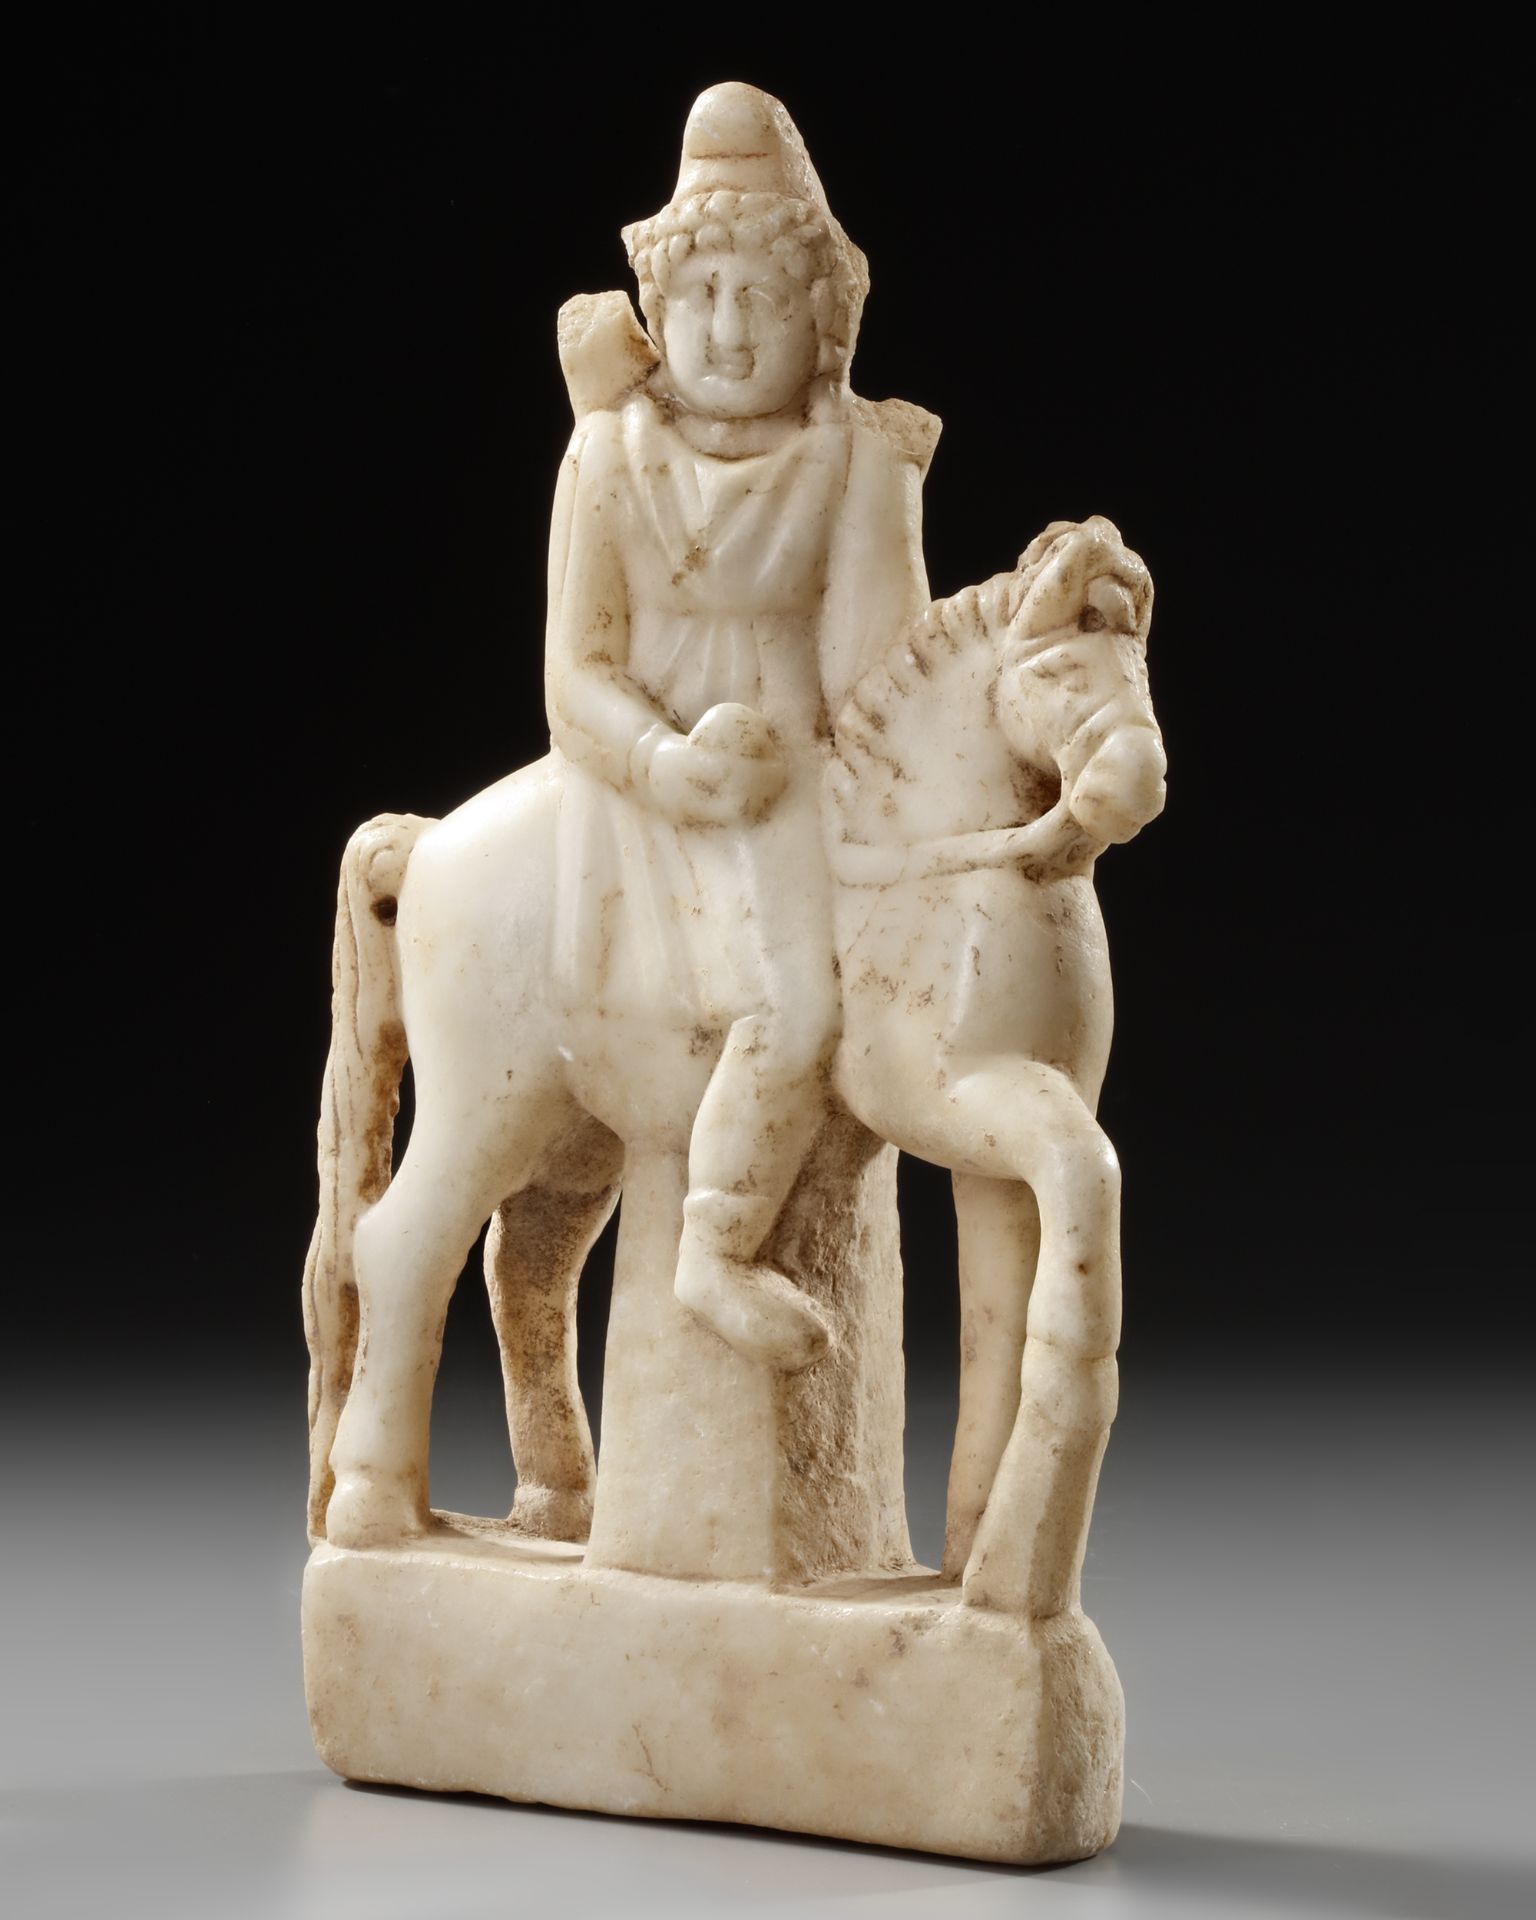 A ROMAN IMPERIAL STATUETTE OF THE GOD MAN ON HORSEBACK, CIRCA 2ND-3RD CENTURY A.D. - Image 2 of 5